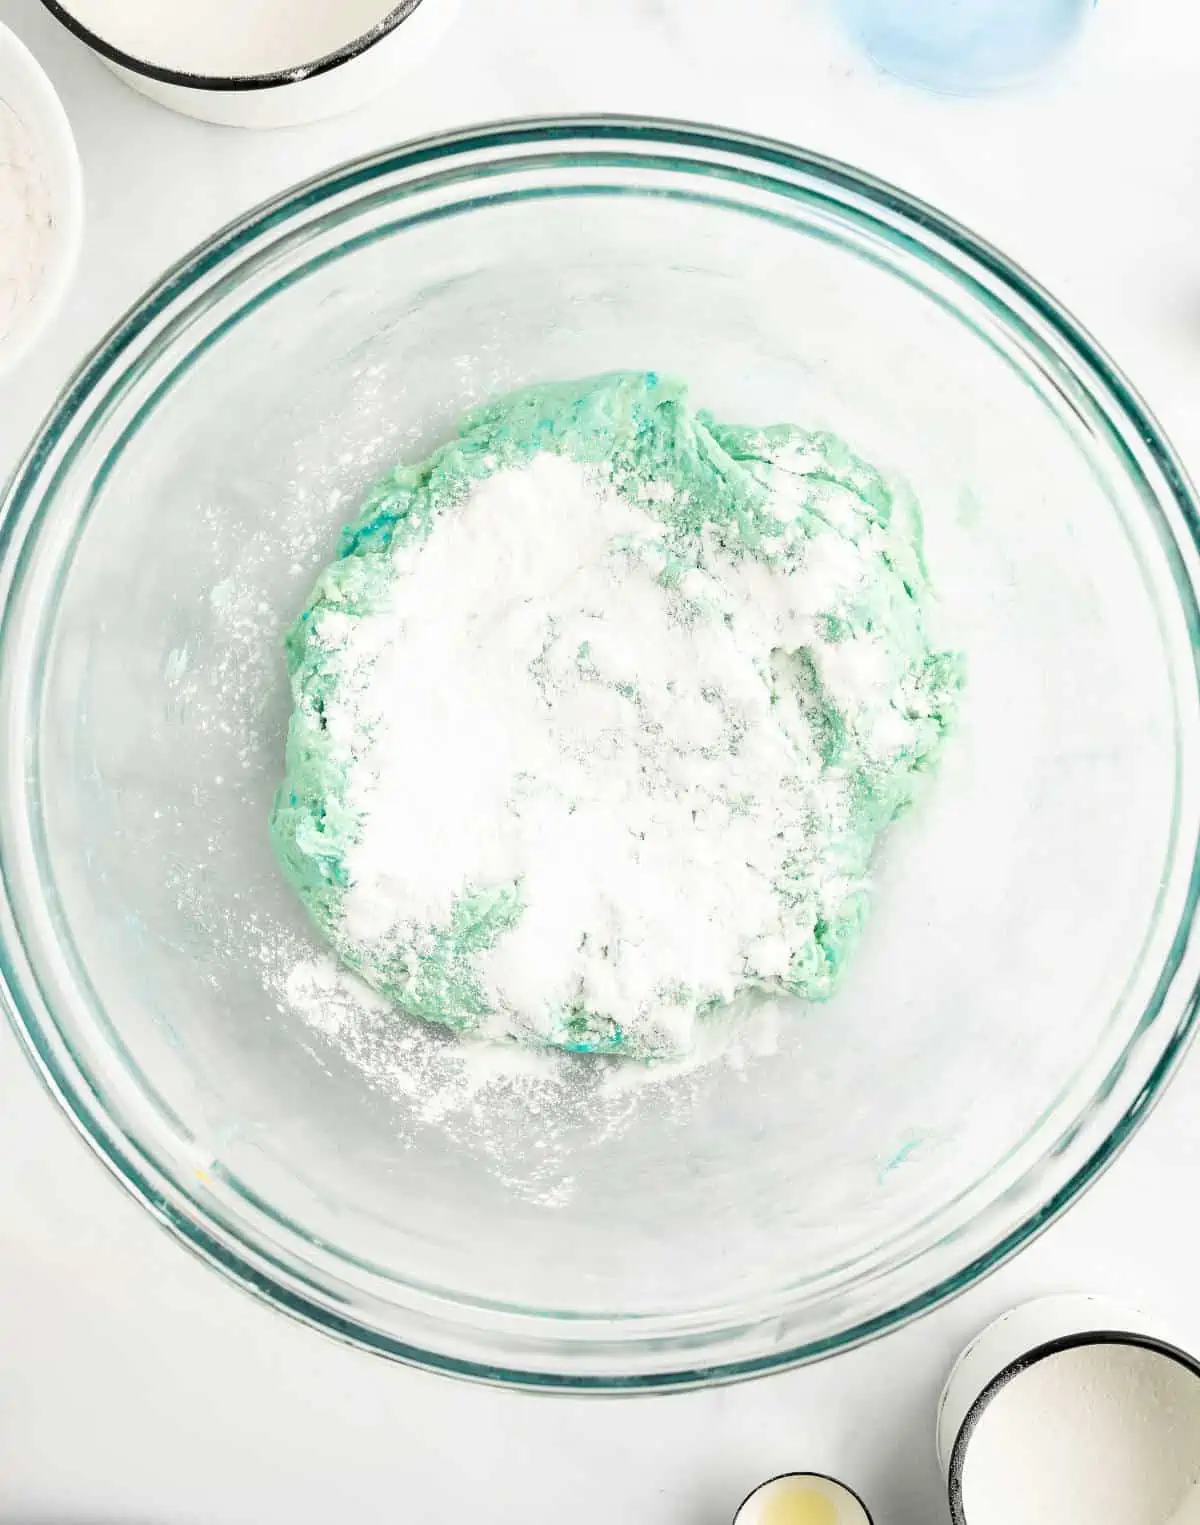 Cornstarch sprinkled onto the dough in a mixing bowl.